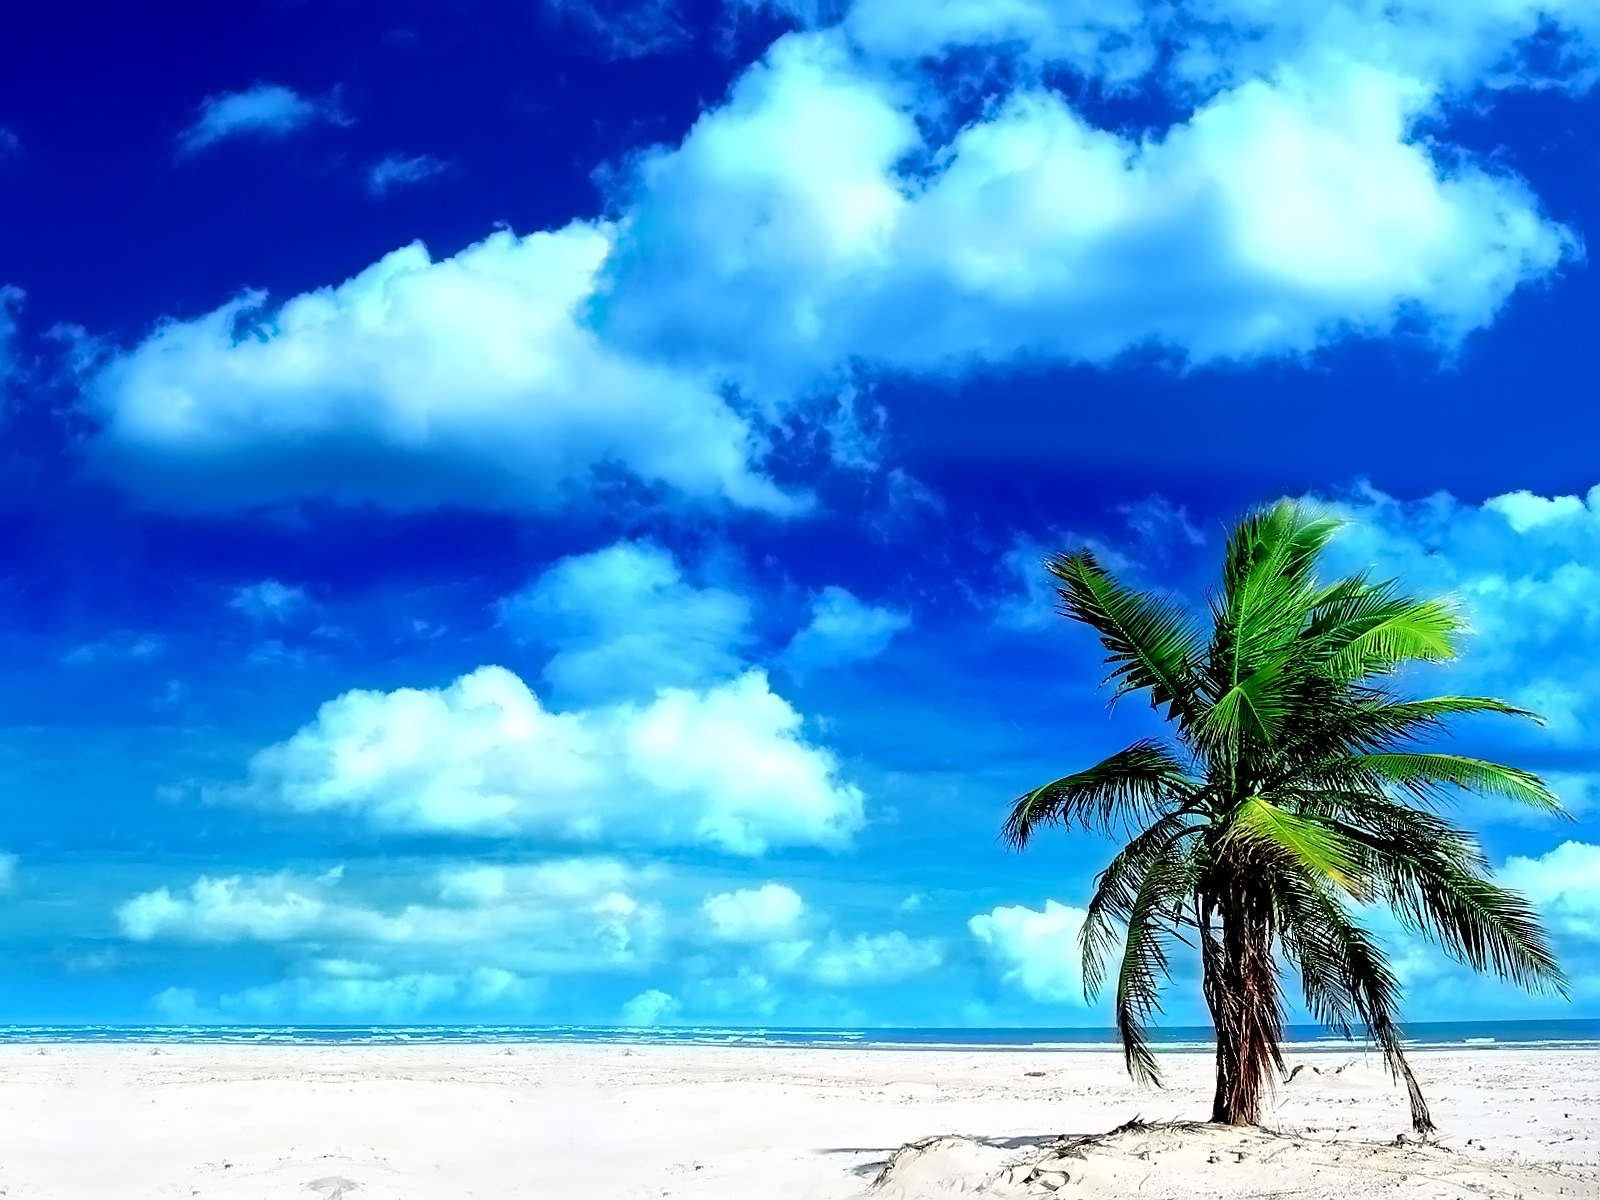 Palm Tree Wallpaper Beaches Nature In Jpg Format For